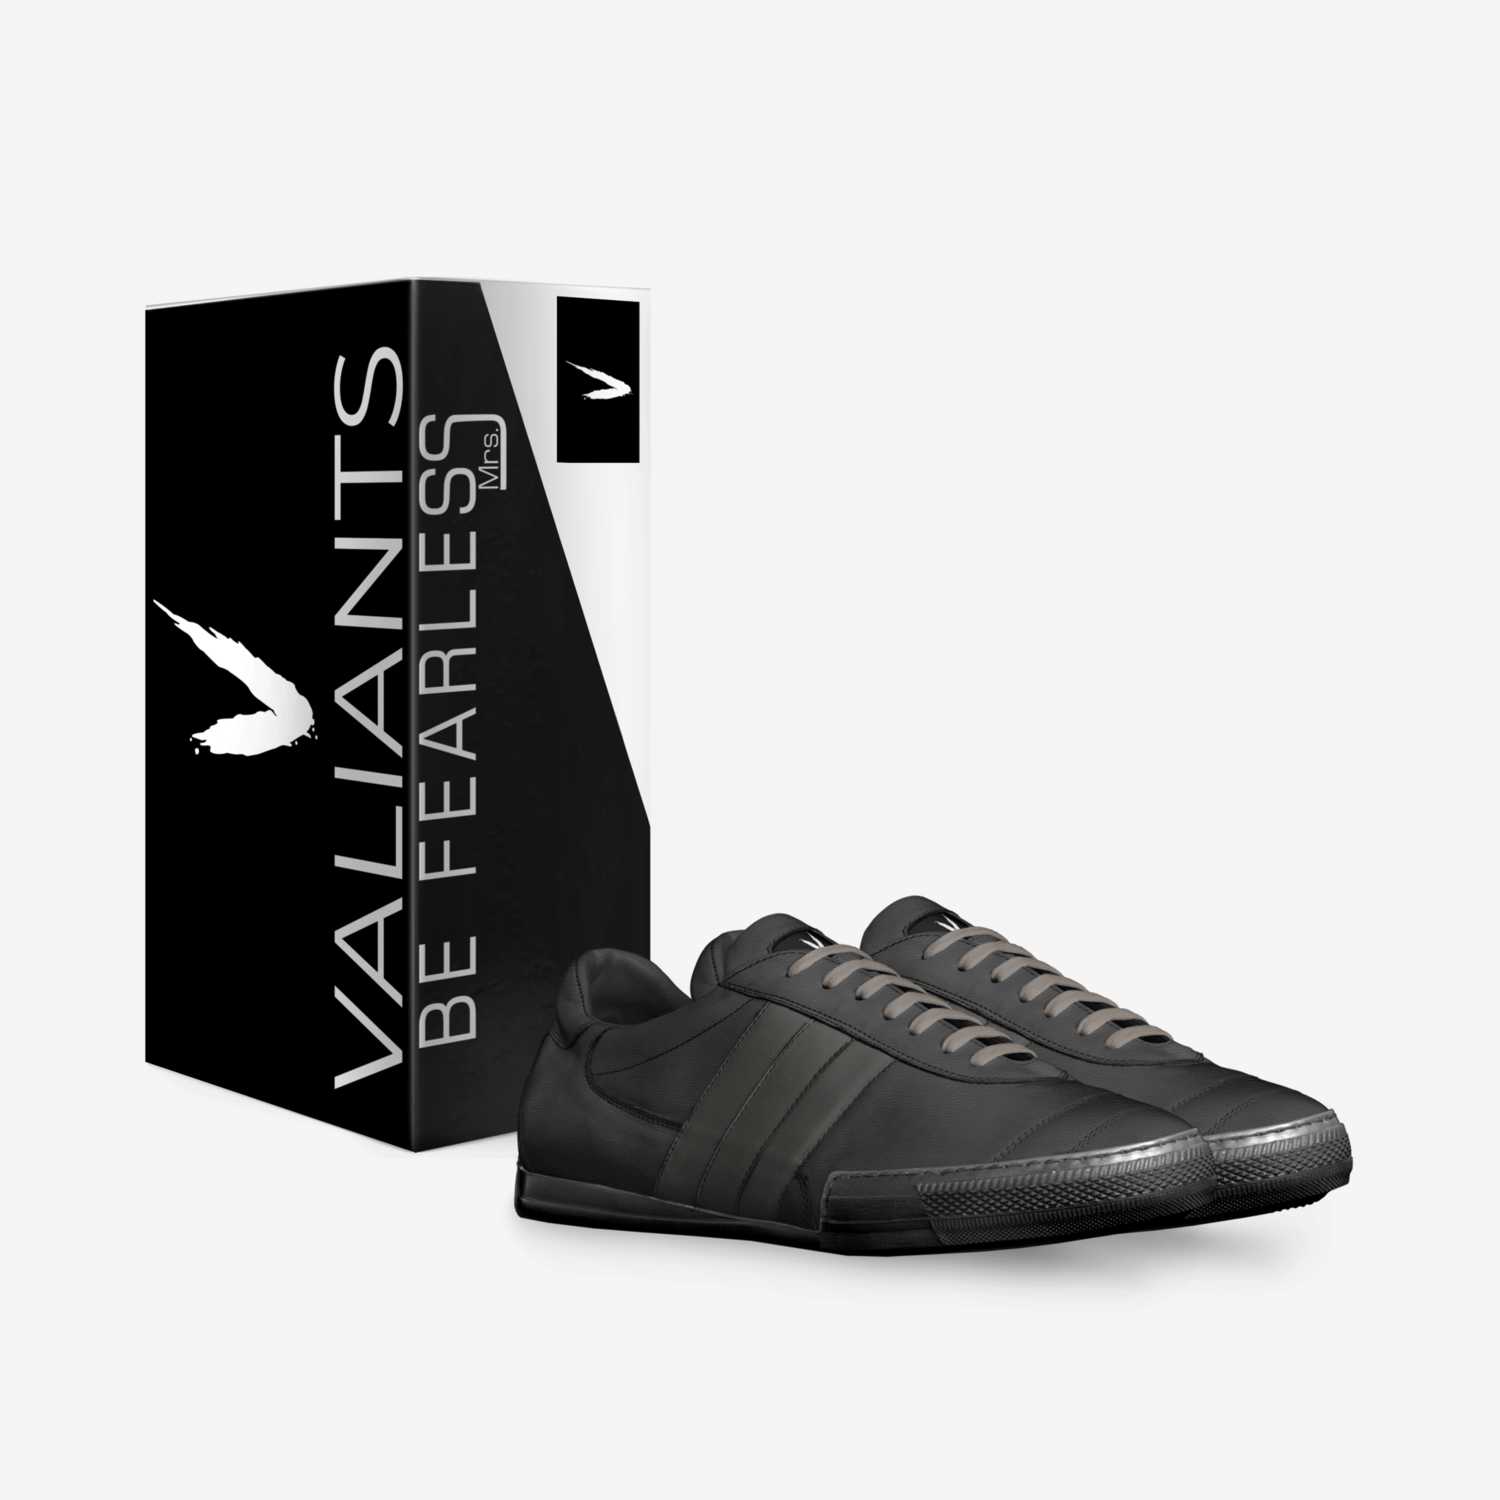 Valiants custom made in Italy shoes by Erika Spaleny | Box view